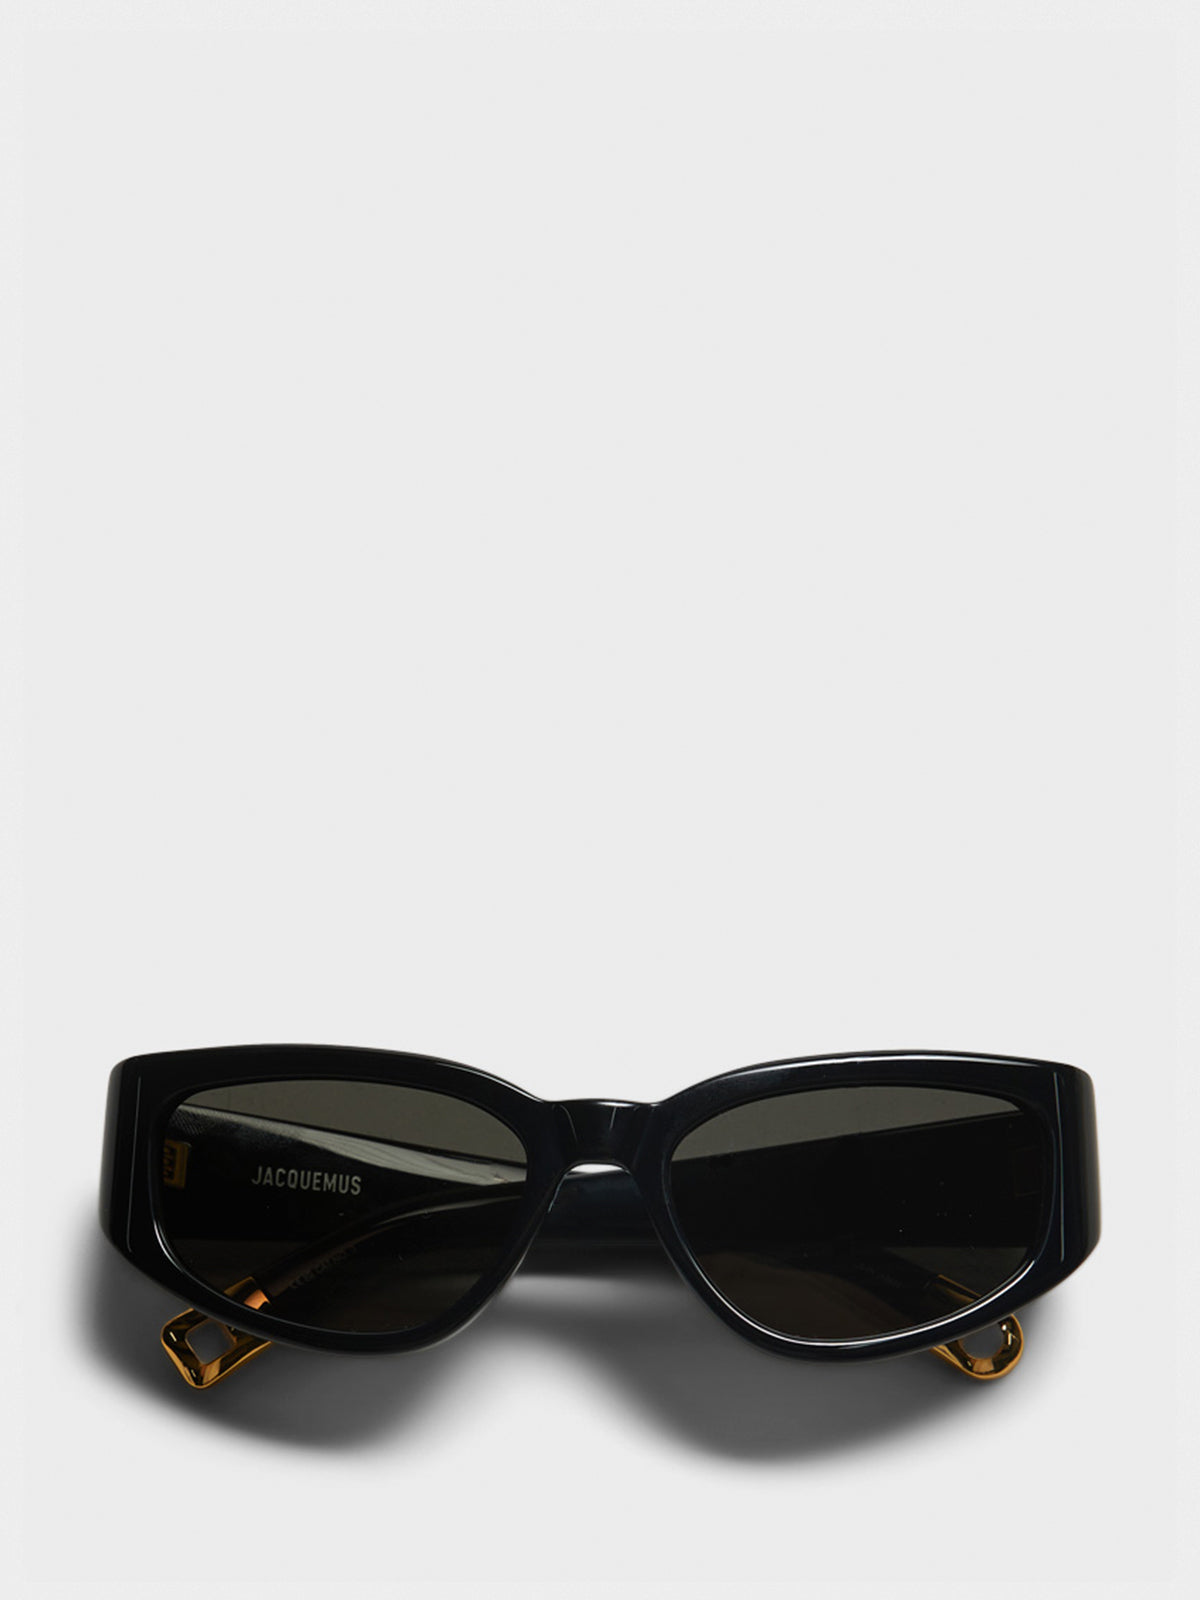 Gala Sunglasses in Black, Yellow Gold and Grey